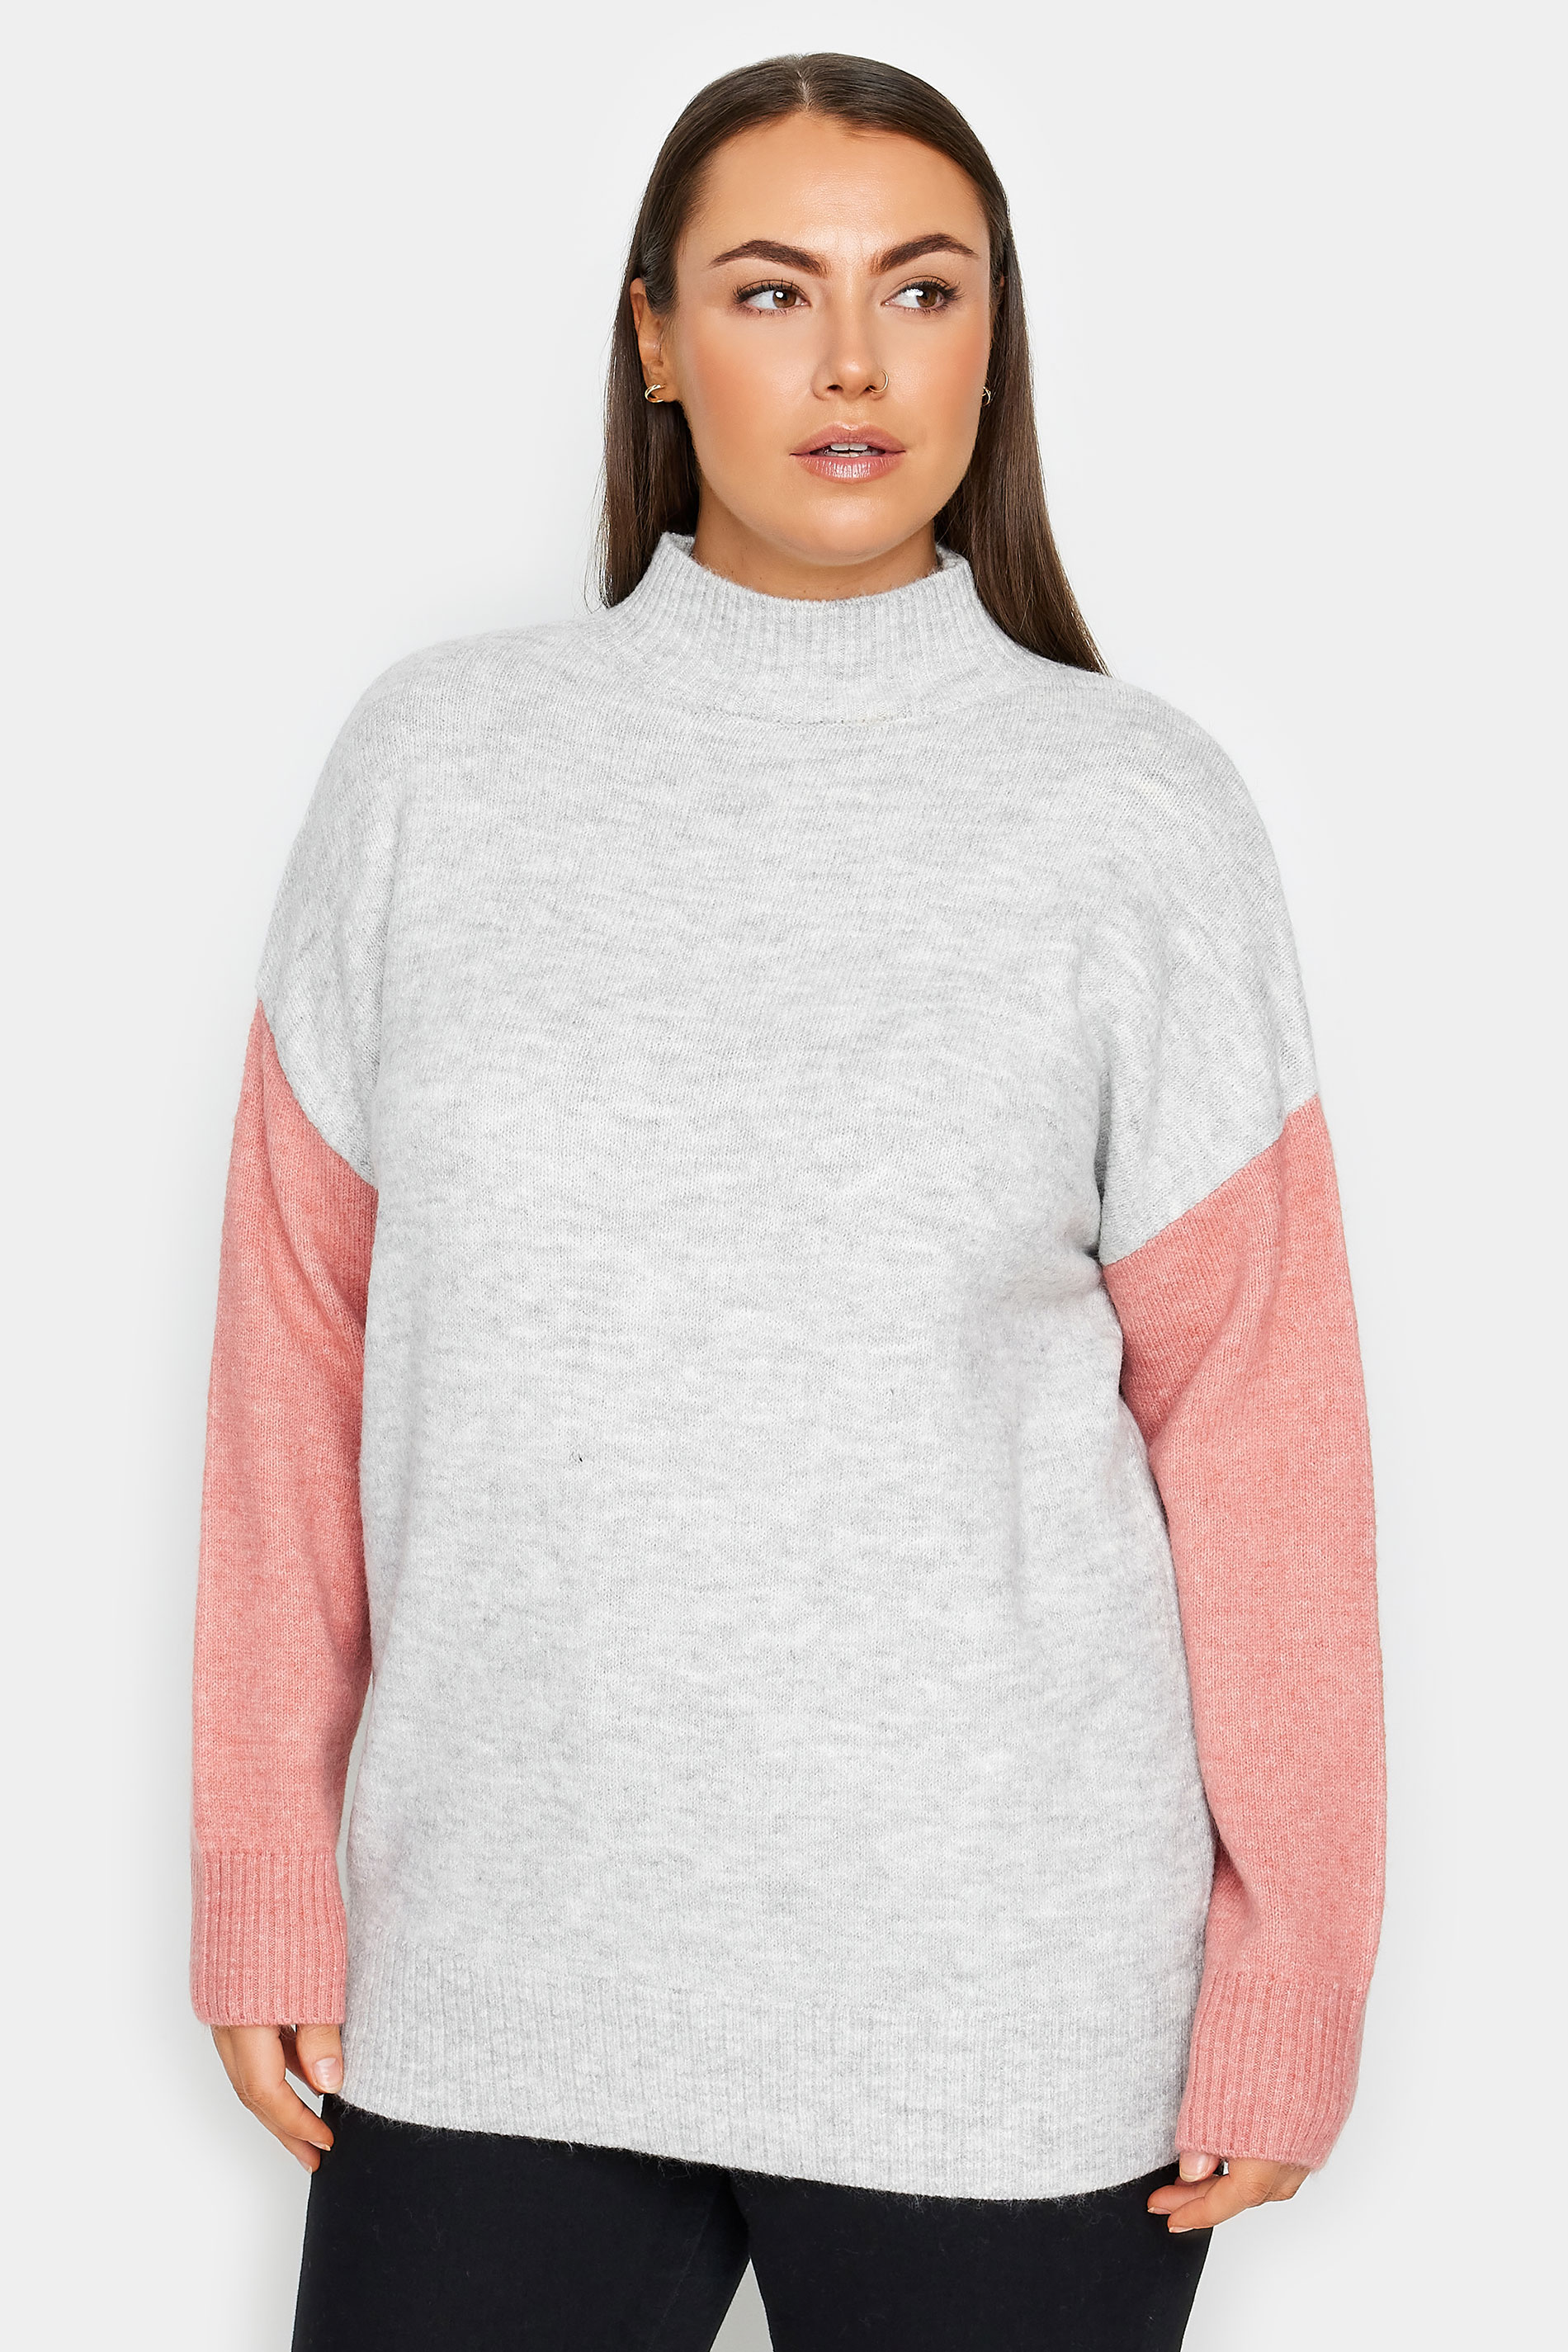 Evans Grey & Pink Colour Block Knitted Jumper 1